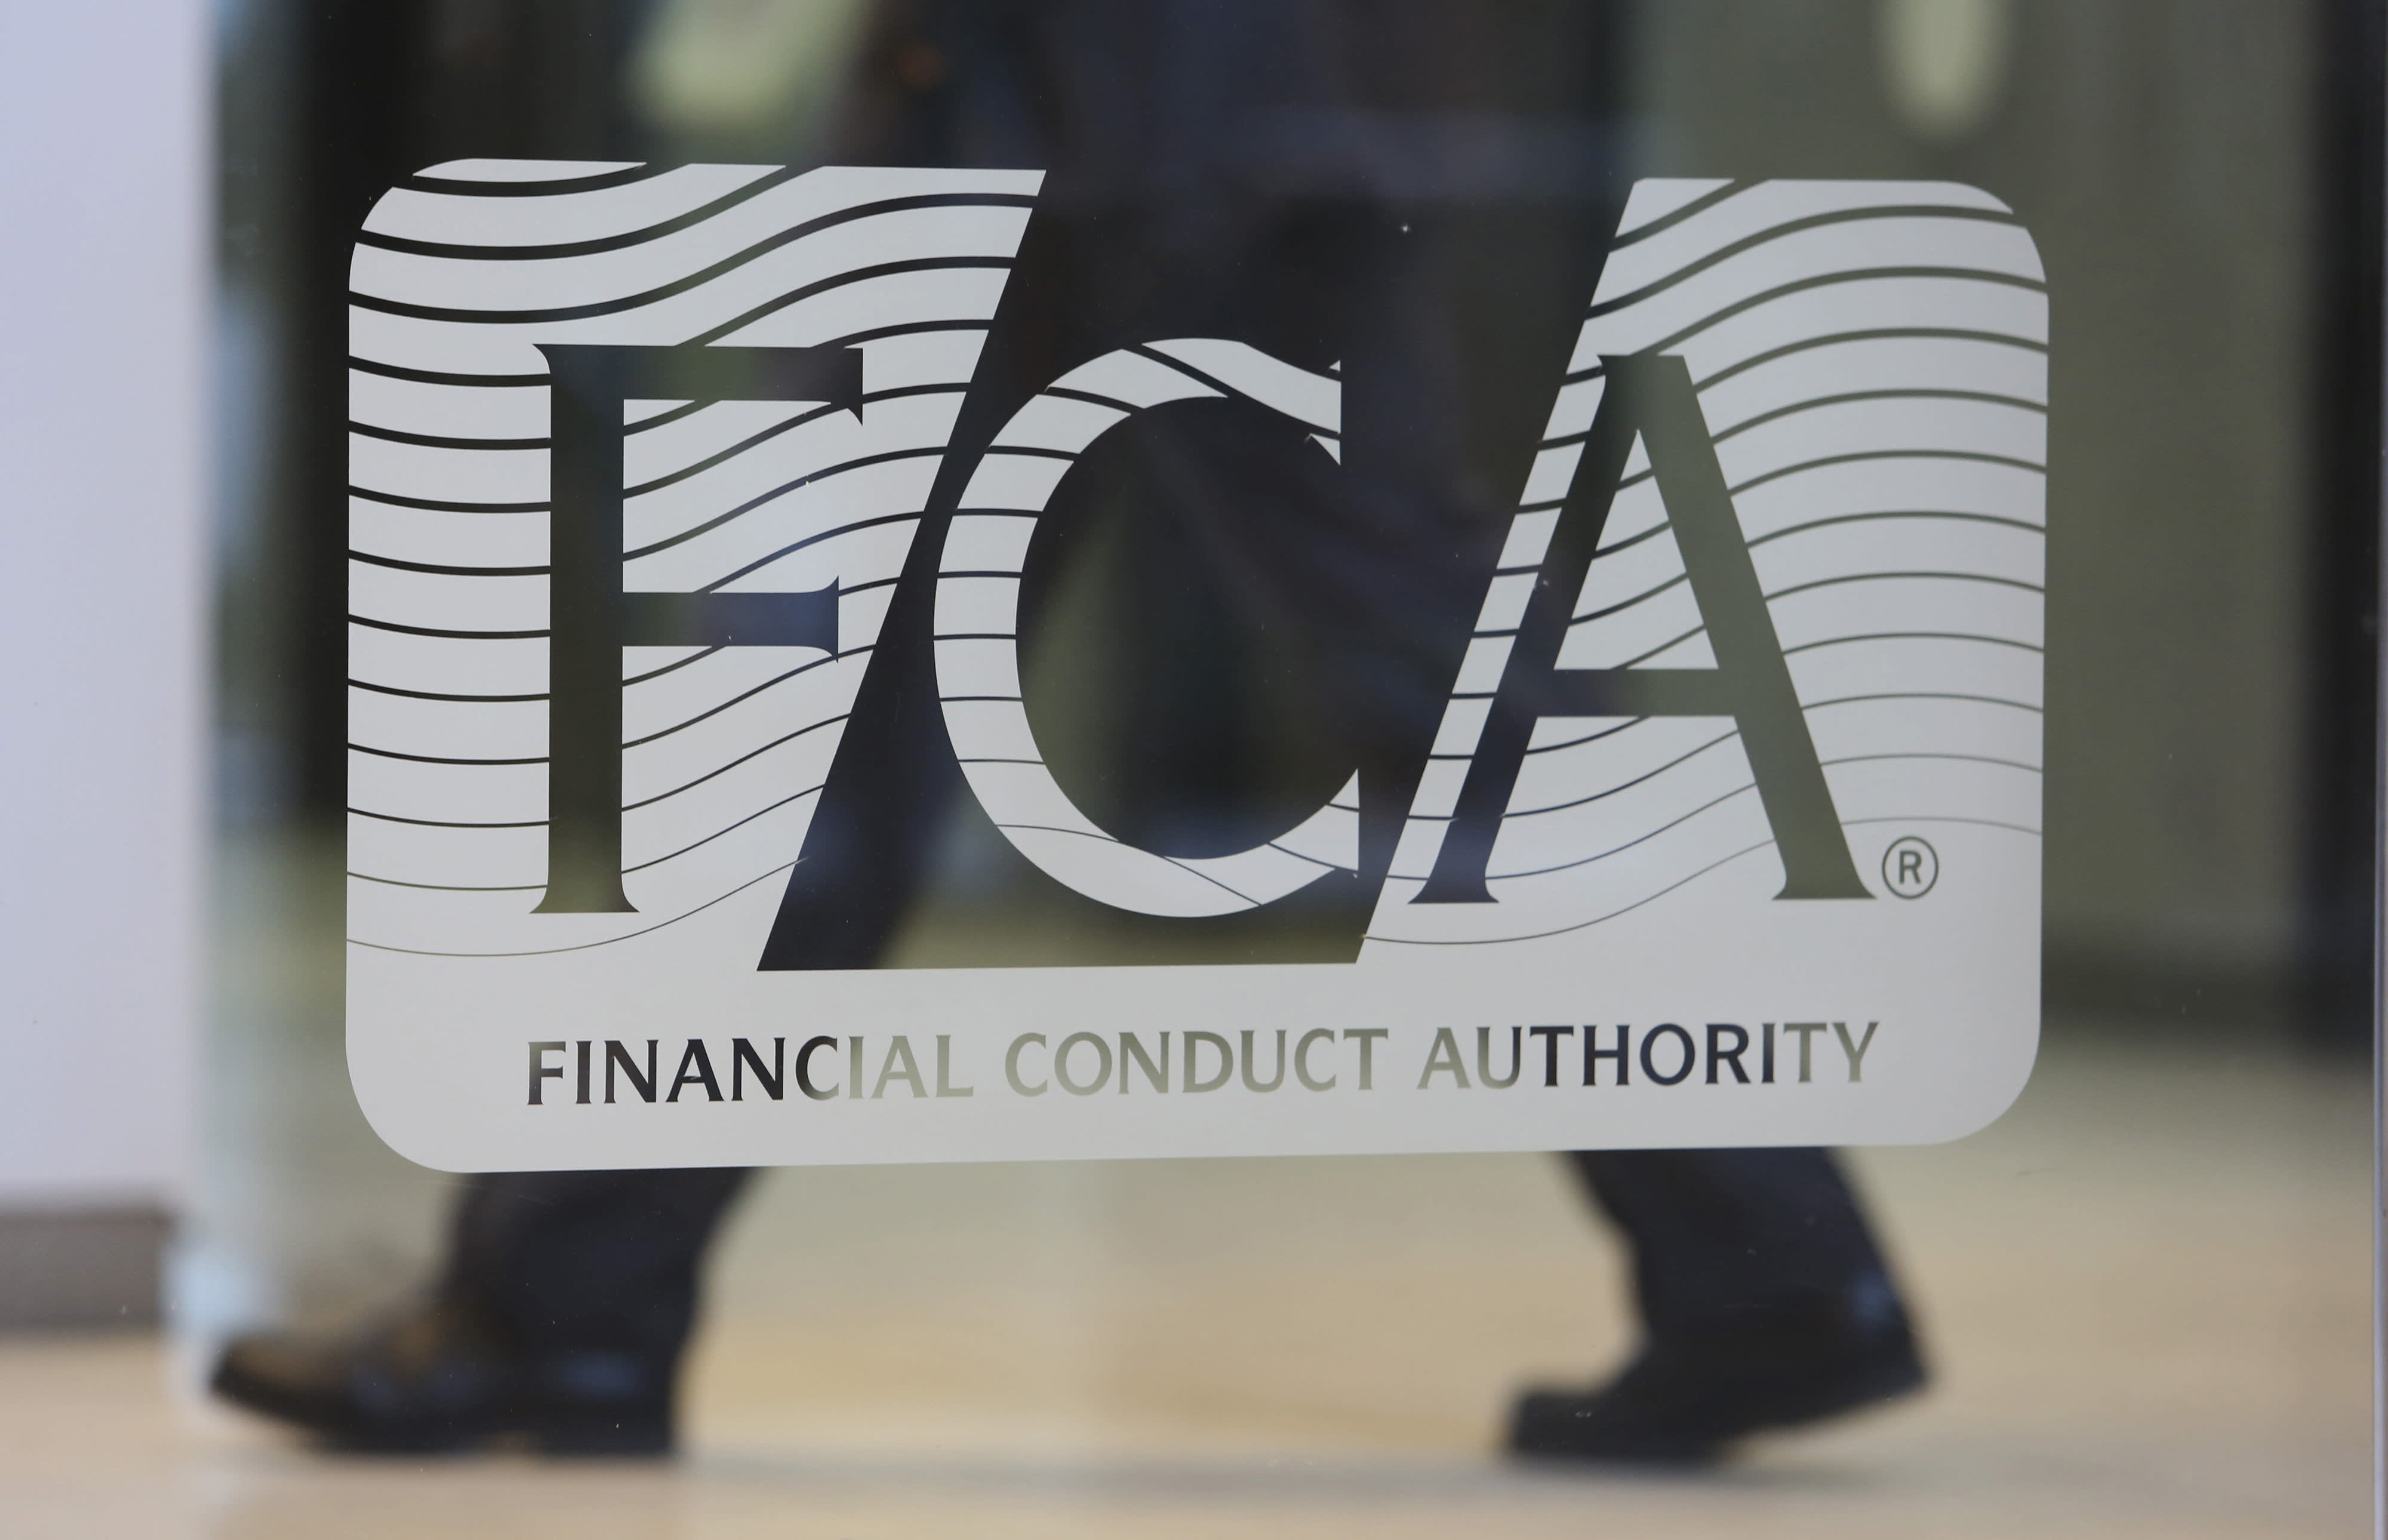 Lack of credit data could lead to over-lending, says FCA